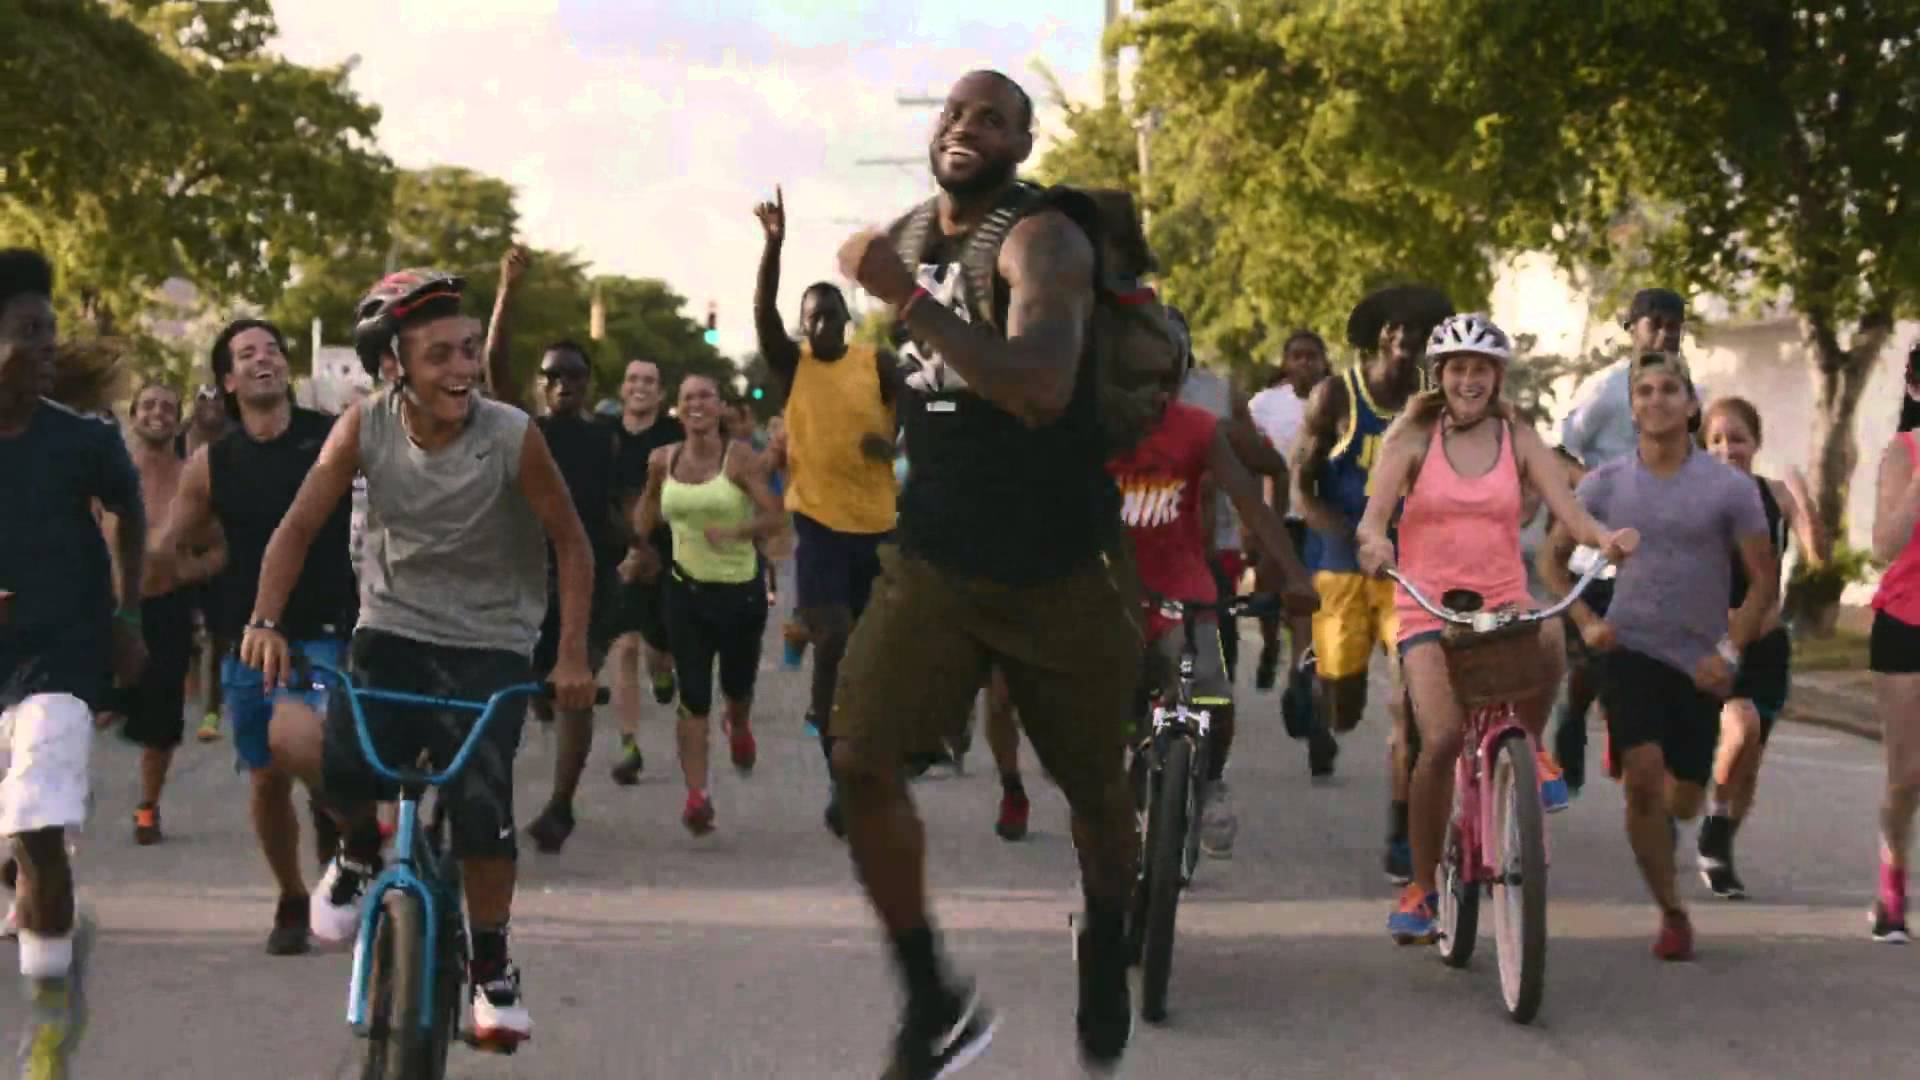 Songs in LeBron James Nike Commercial Day Strive